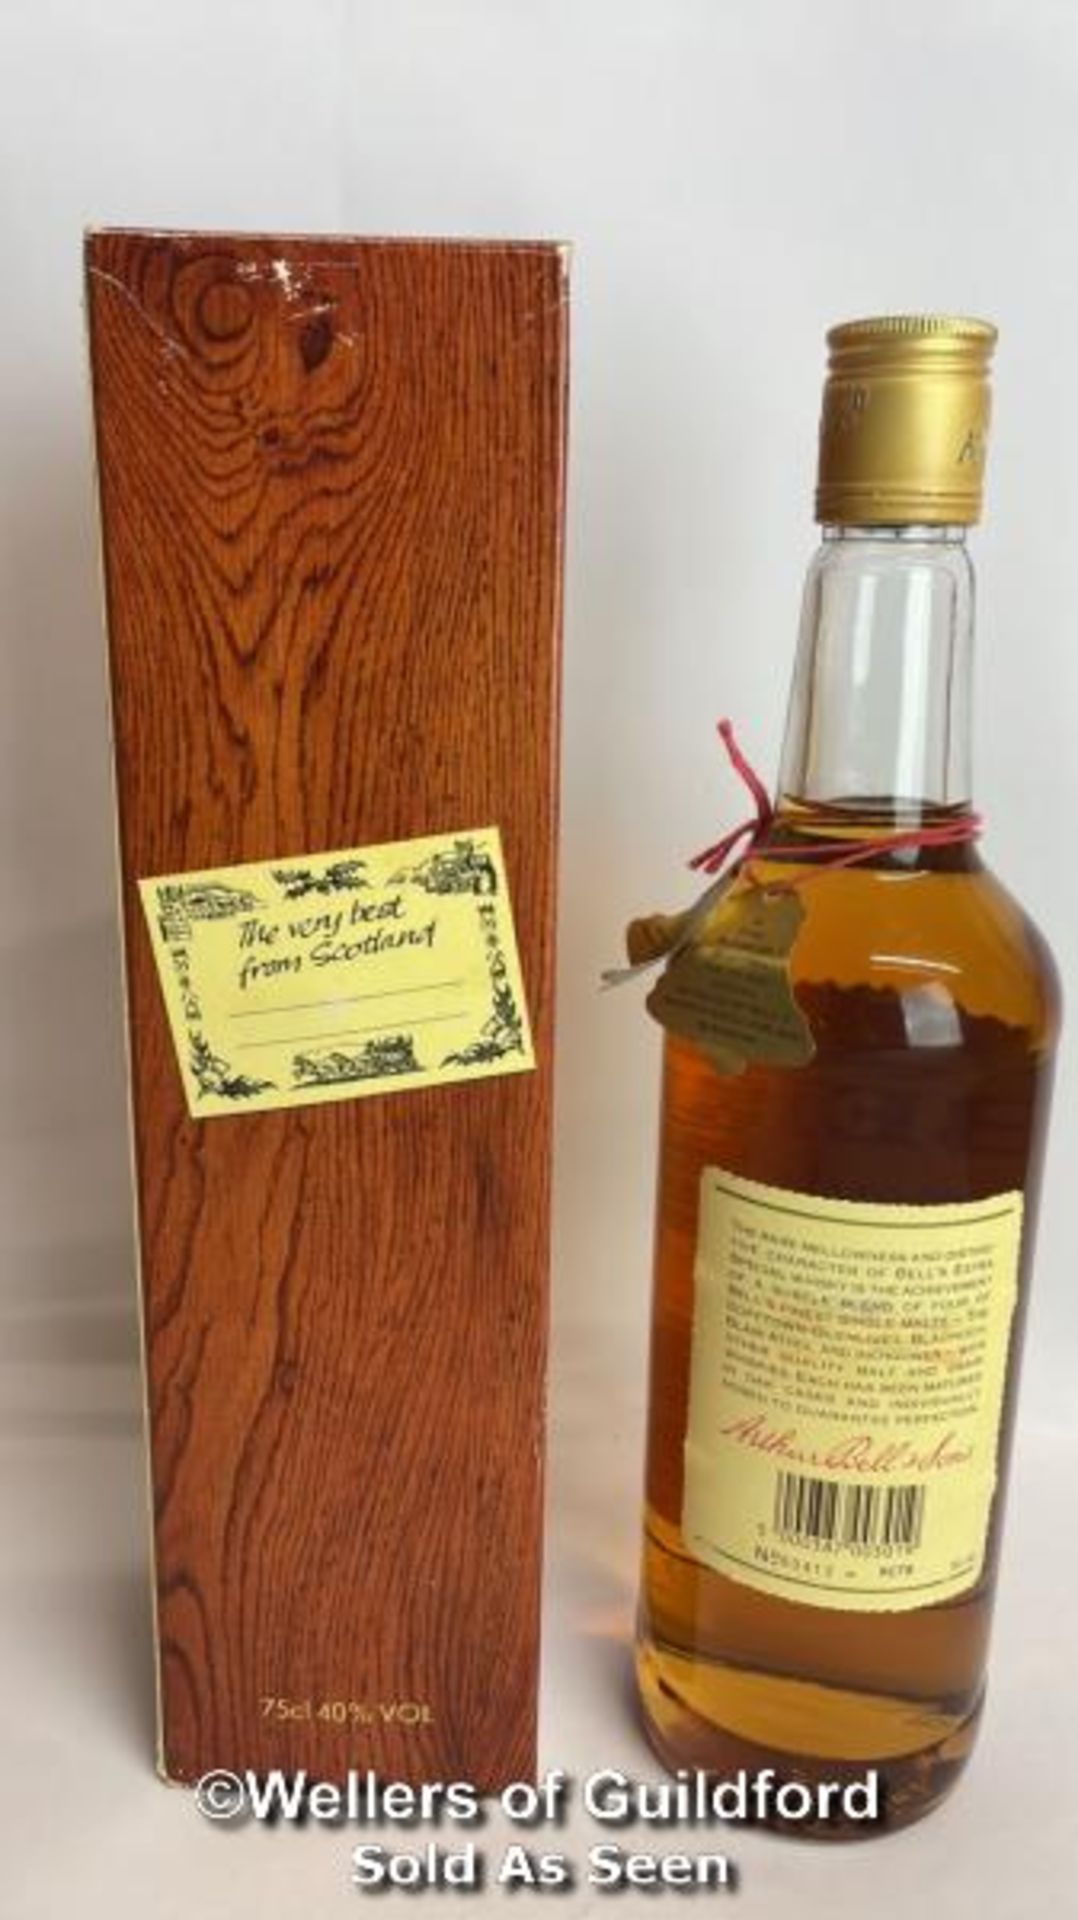 Bell's Extra Special Old Scotch Whisky, "Afore Ye Go", 75cl, 43% vol, In original box / Please see - Image 6 of 12